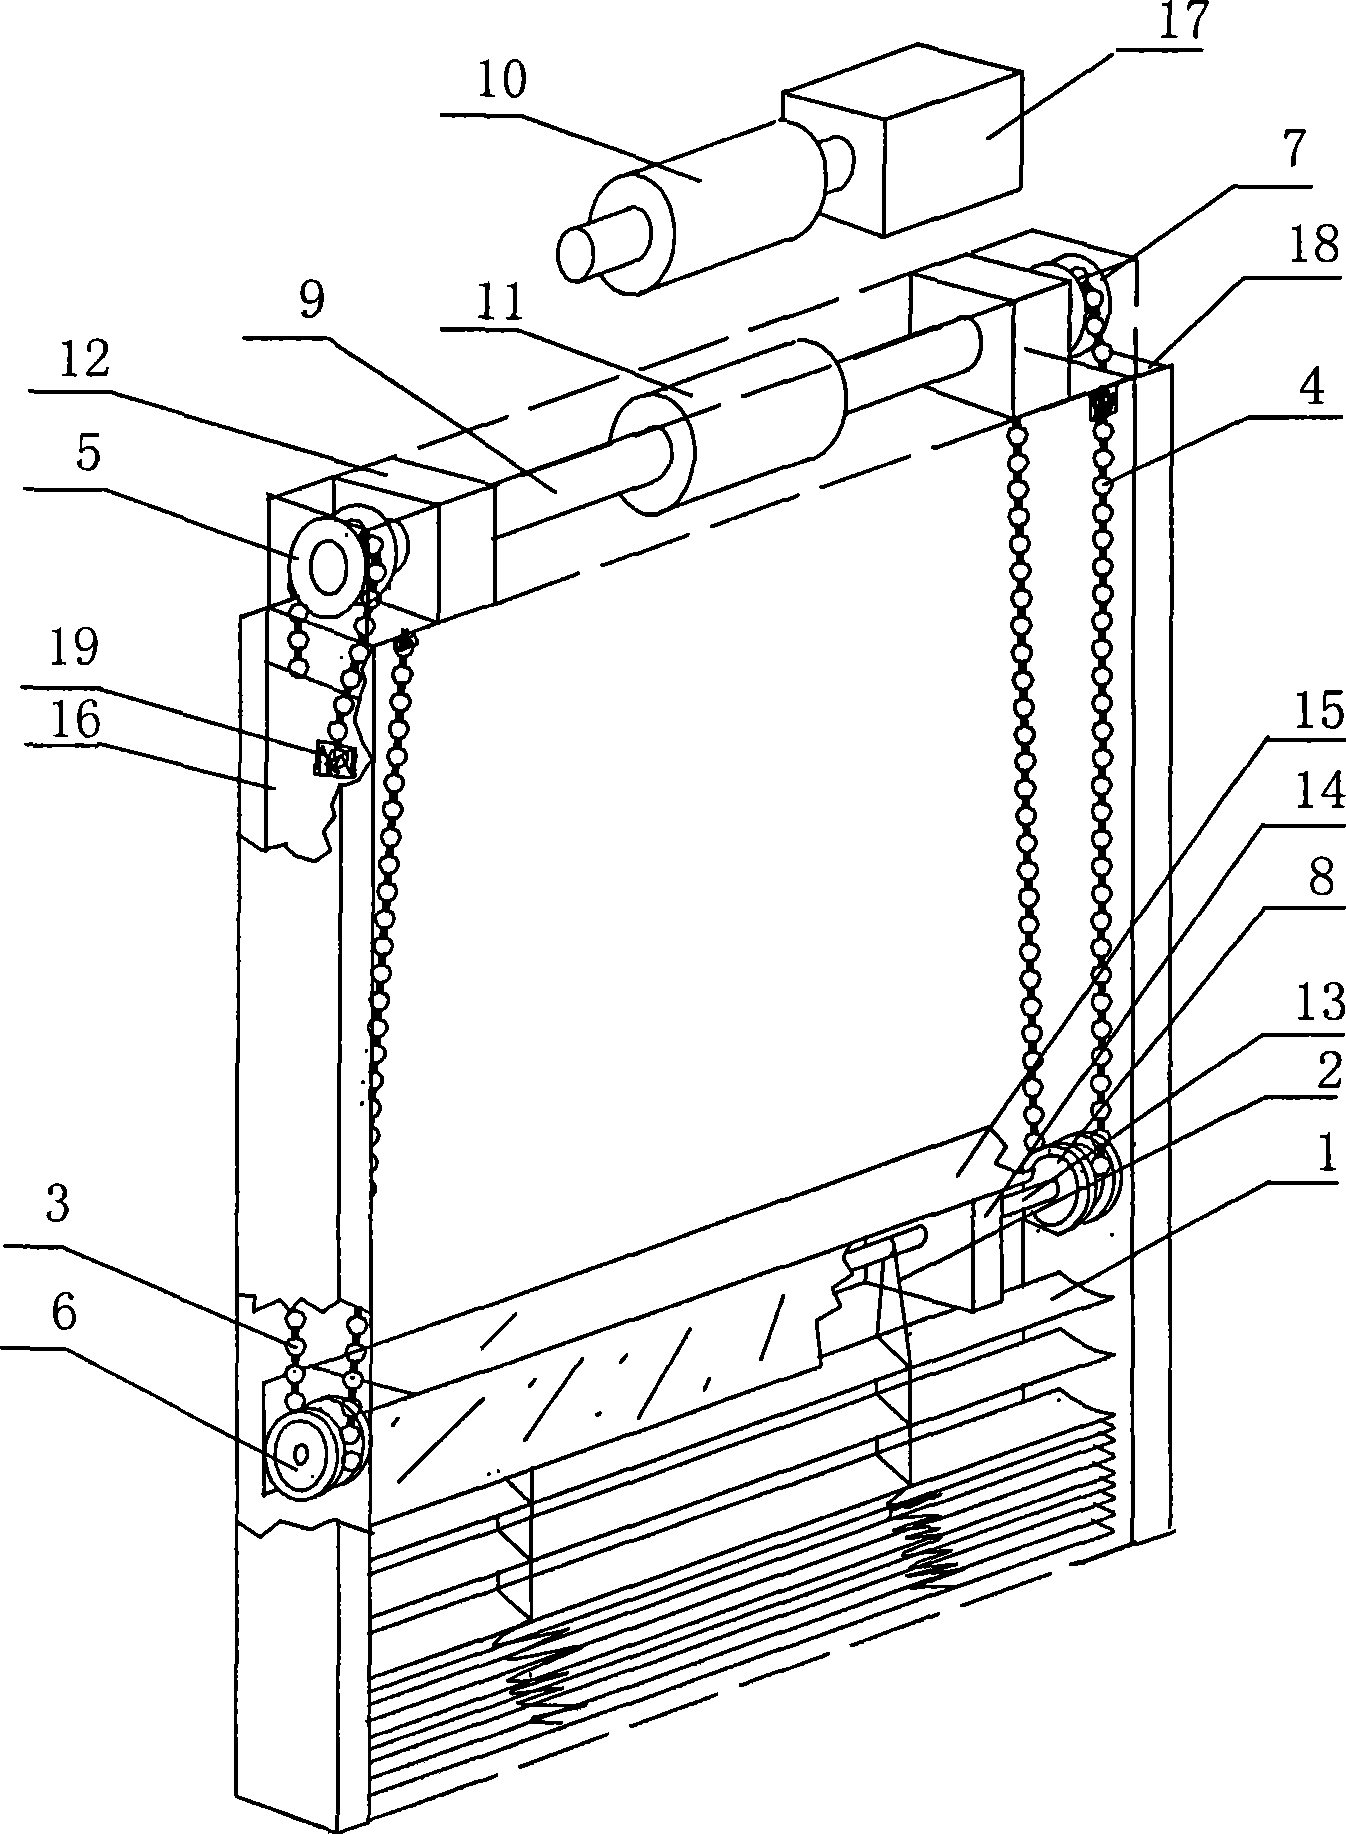 Chain drive of bottom-fixed blind curtain